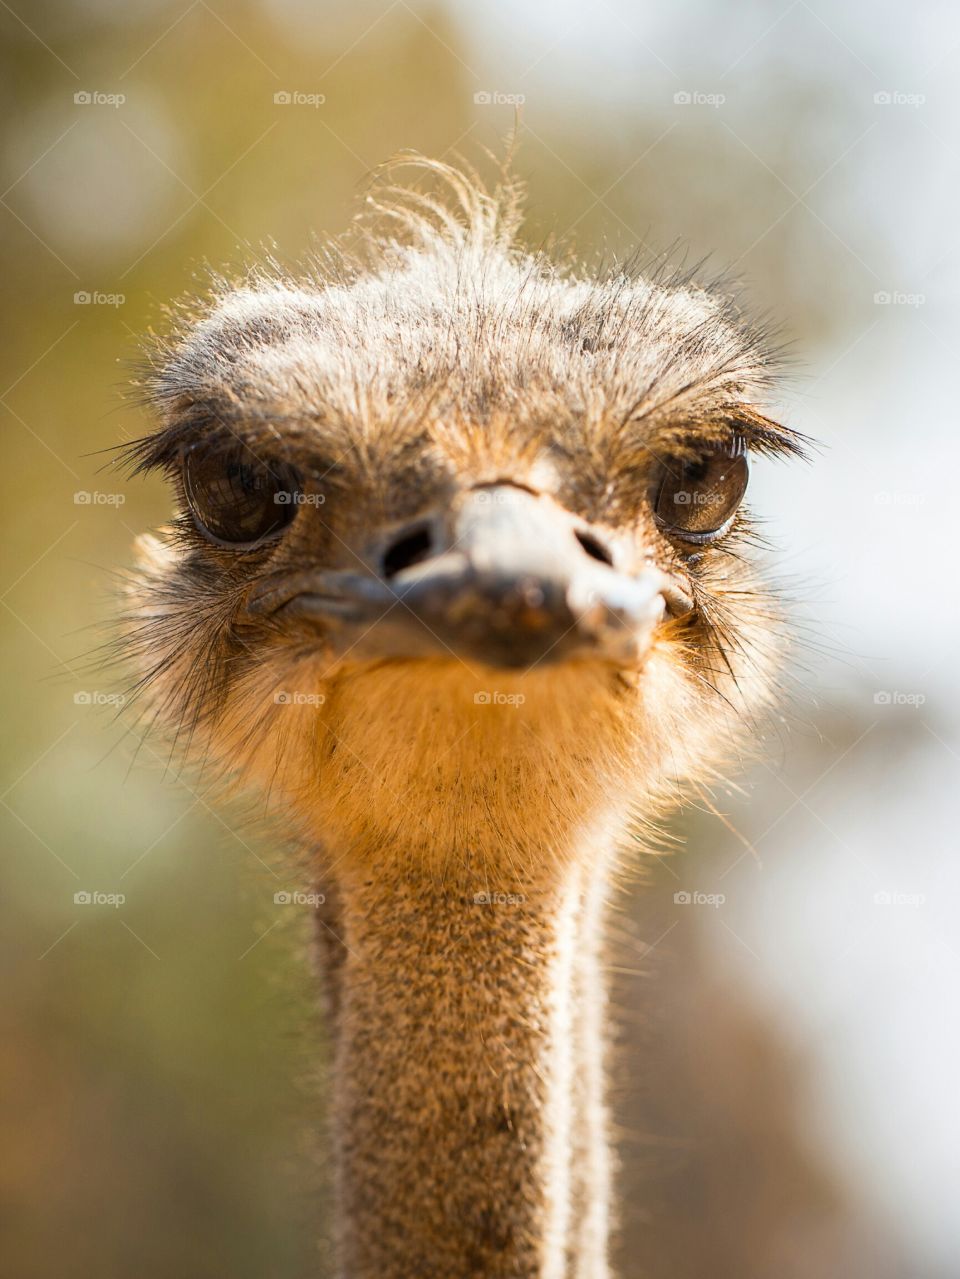 'The ostrich look and a bad hair day'. Close up image of ostrich eyes and face showing all the hair in different directions!